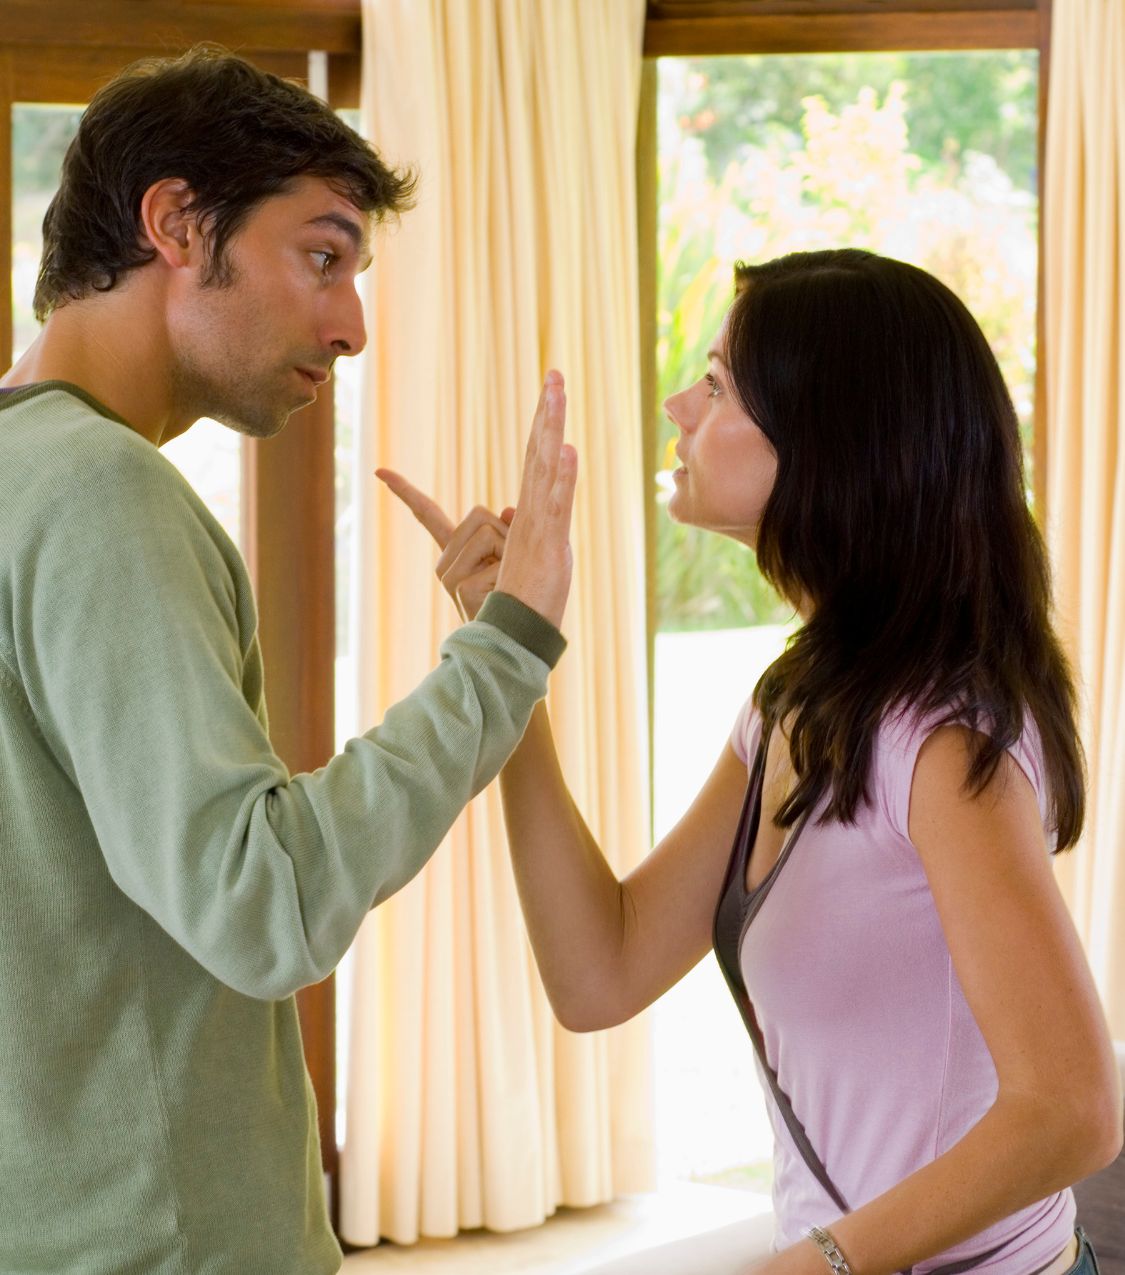 A woman and a man point at each other in a heated argument. Marriage reconciliation is challenging after an affair, but Relationship Experts can help. Contact us for a free consultation in New York, Canada, and the United Kingdom